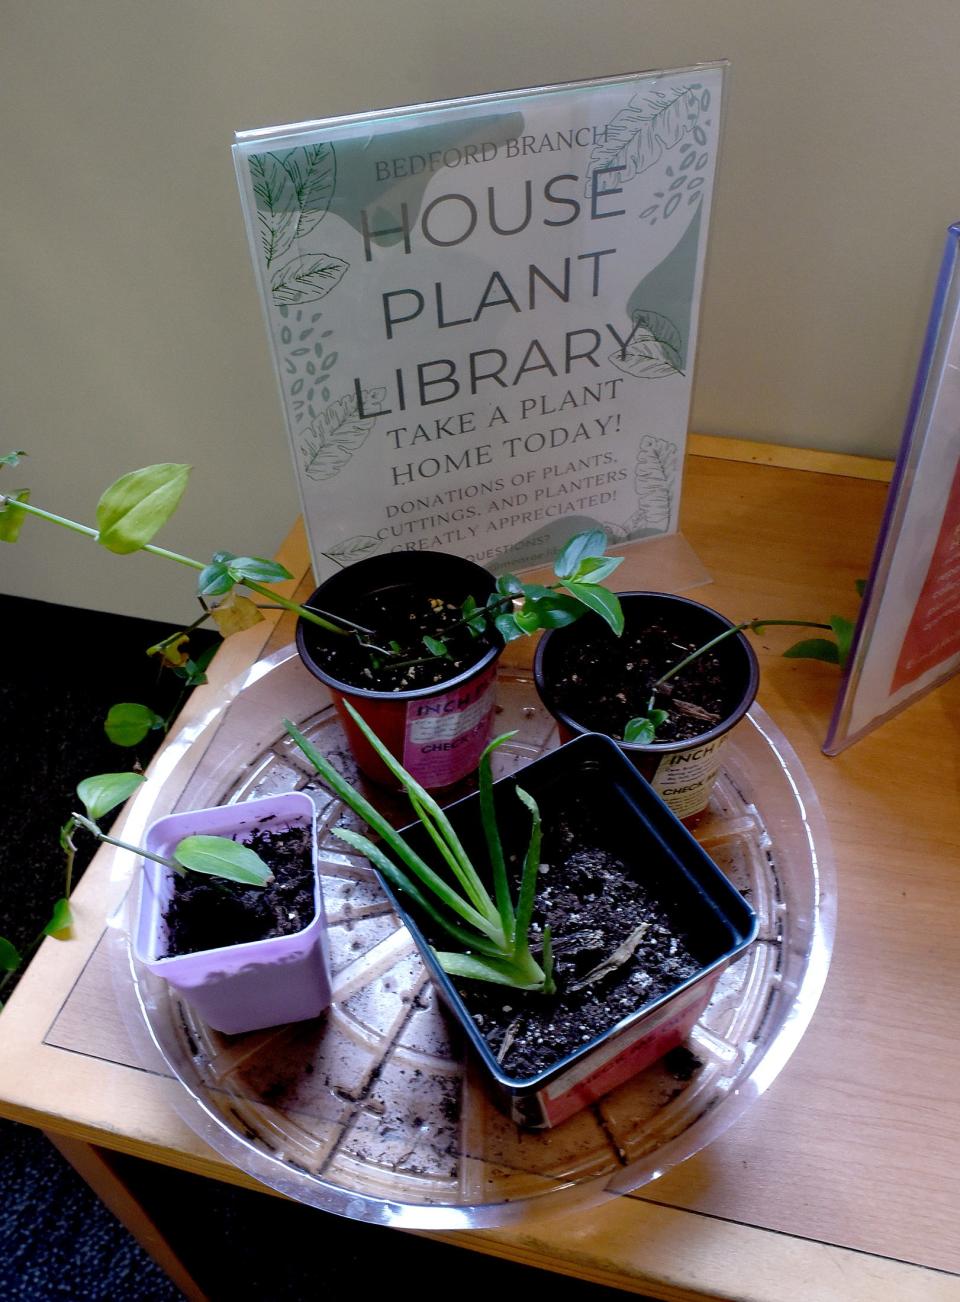 Plants ready to be checked-out are shown at the Bedford Branch Library.